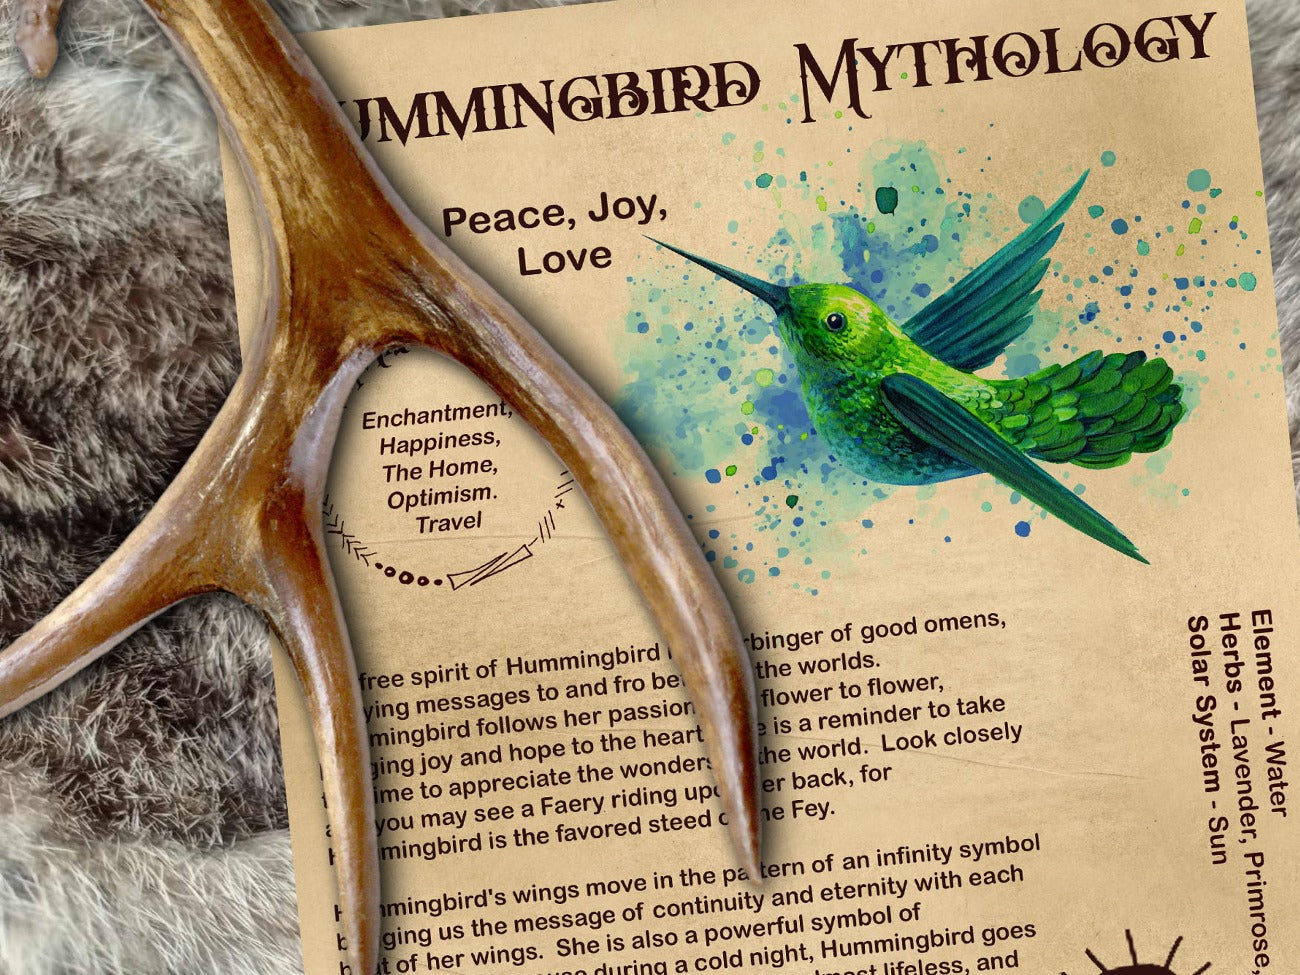 ummingbird Magick Myths & Correspondences 1 printable Book of Shadows Page is displayed in an ancient book on a fur rug with a deer antler. Shown with the parchment background